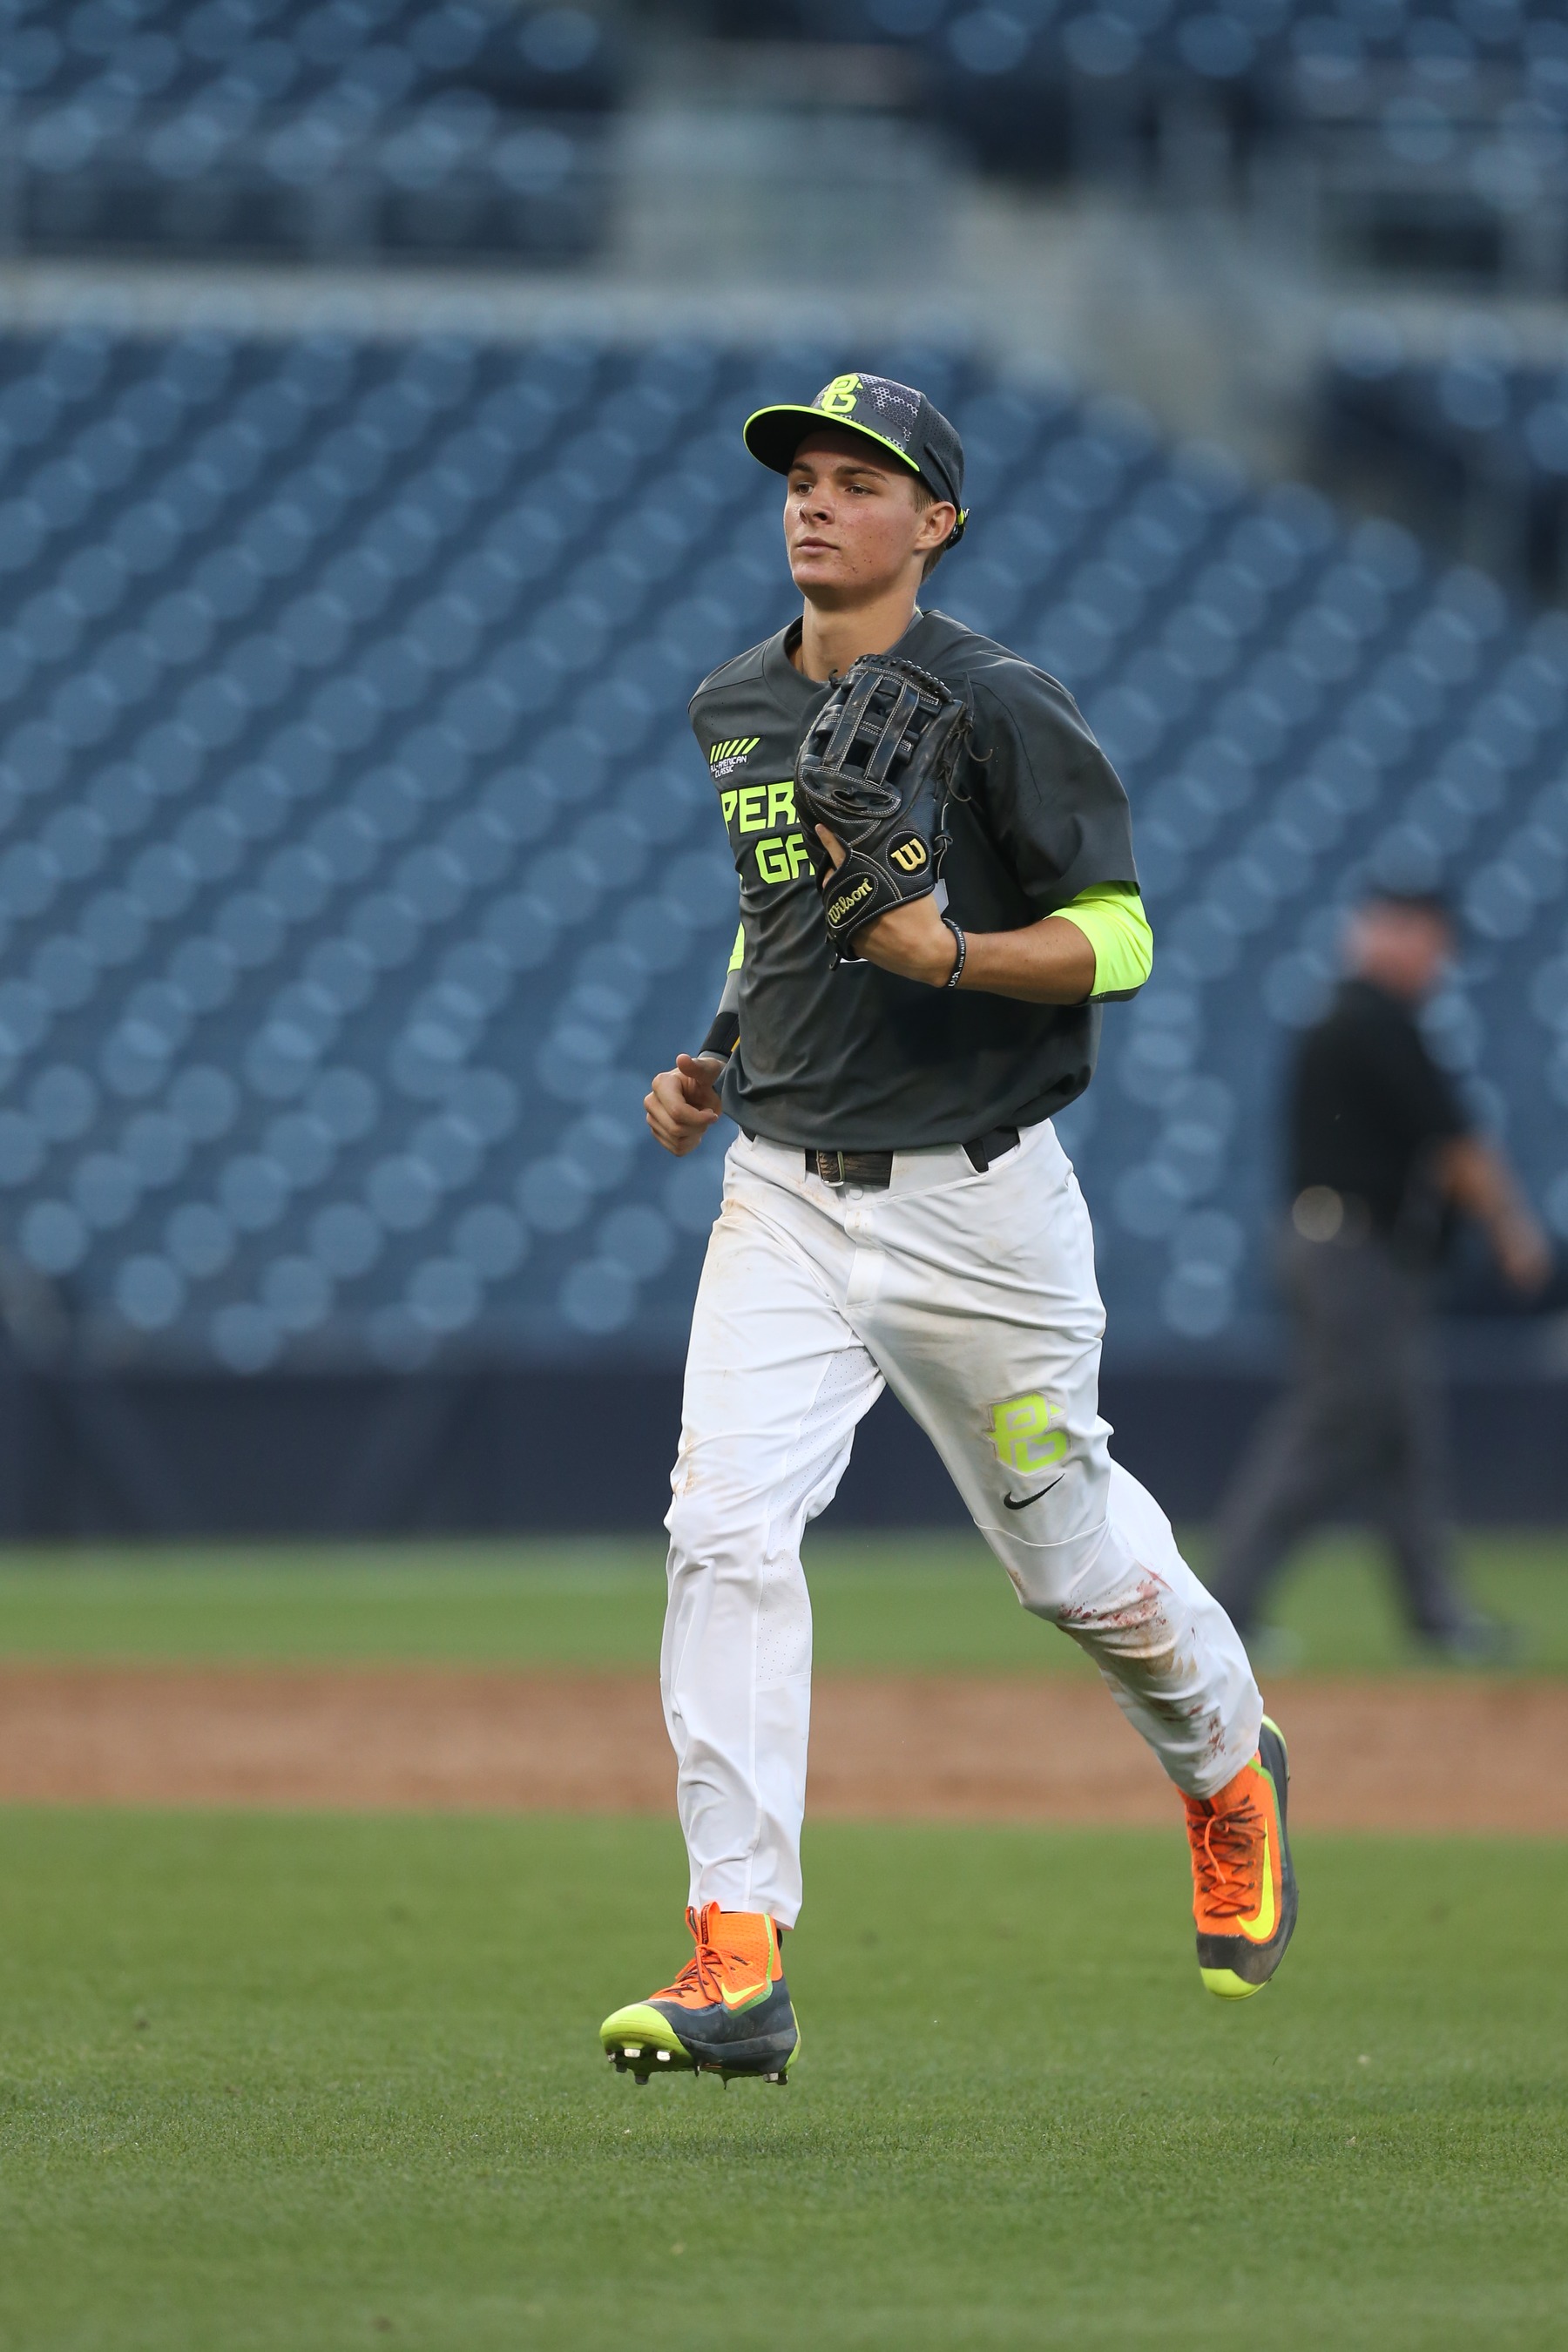 Mickey Moniak of the West team during the 2015 Perfect Game All-American Classic at Petco Park on August 16, 2015 in San Diego, California. (Larry Goren–Four Seam Images)